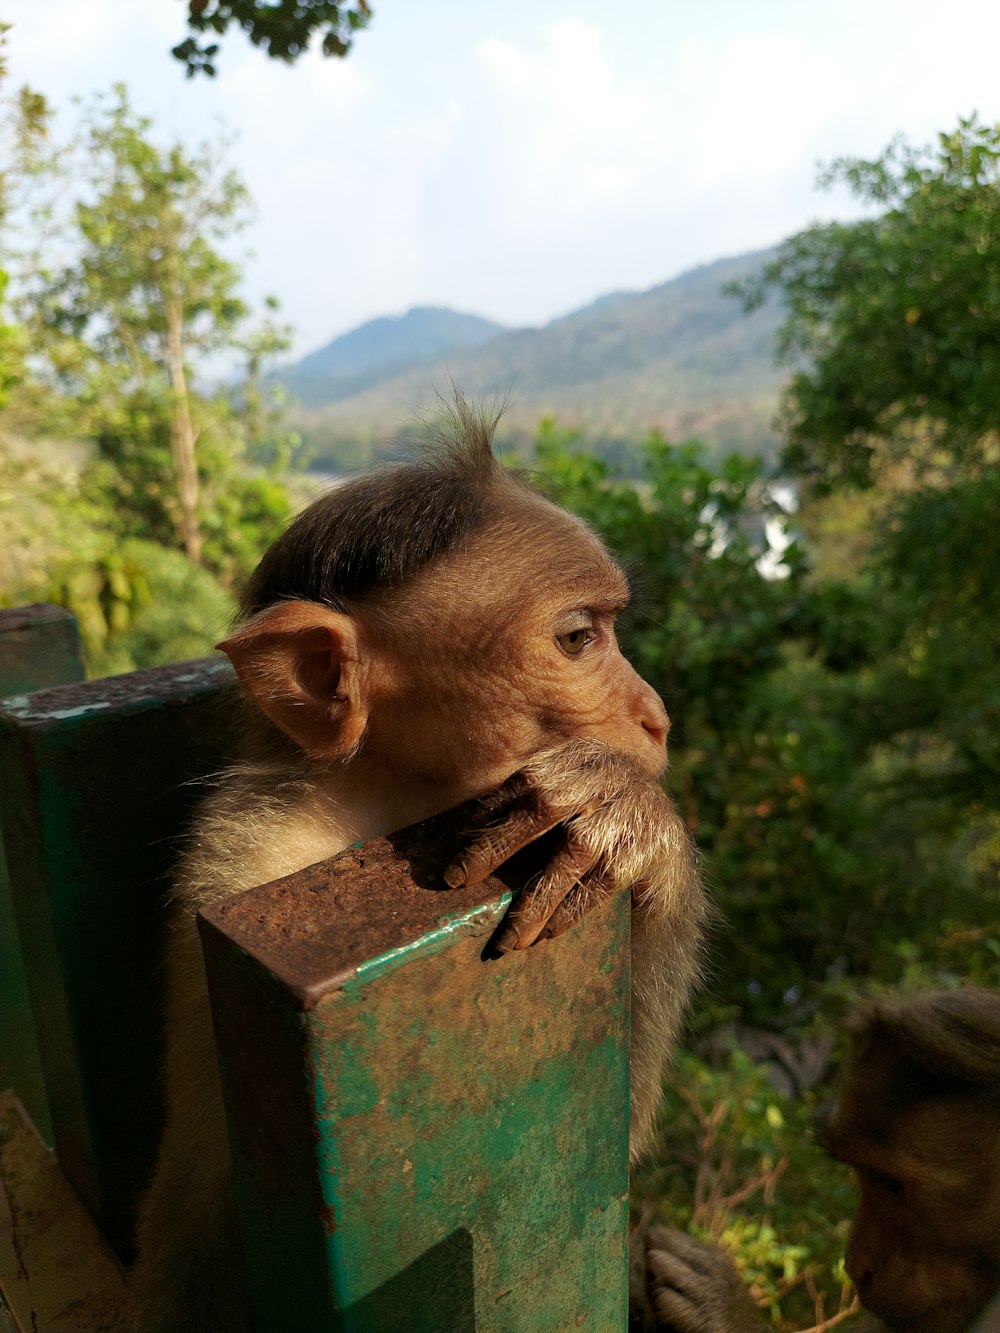 a small monkey sitting on top of a wooden fence